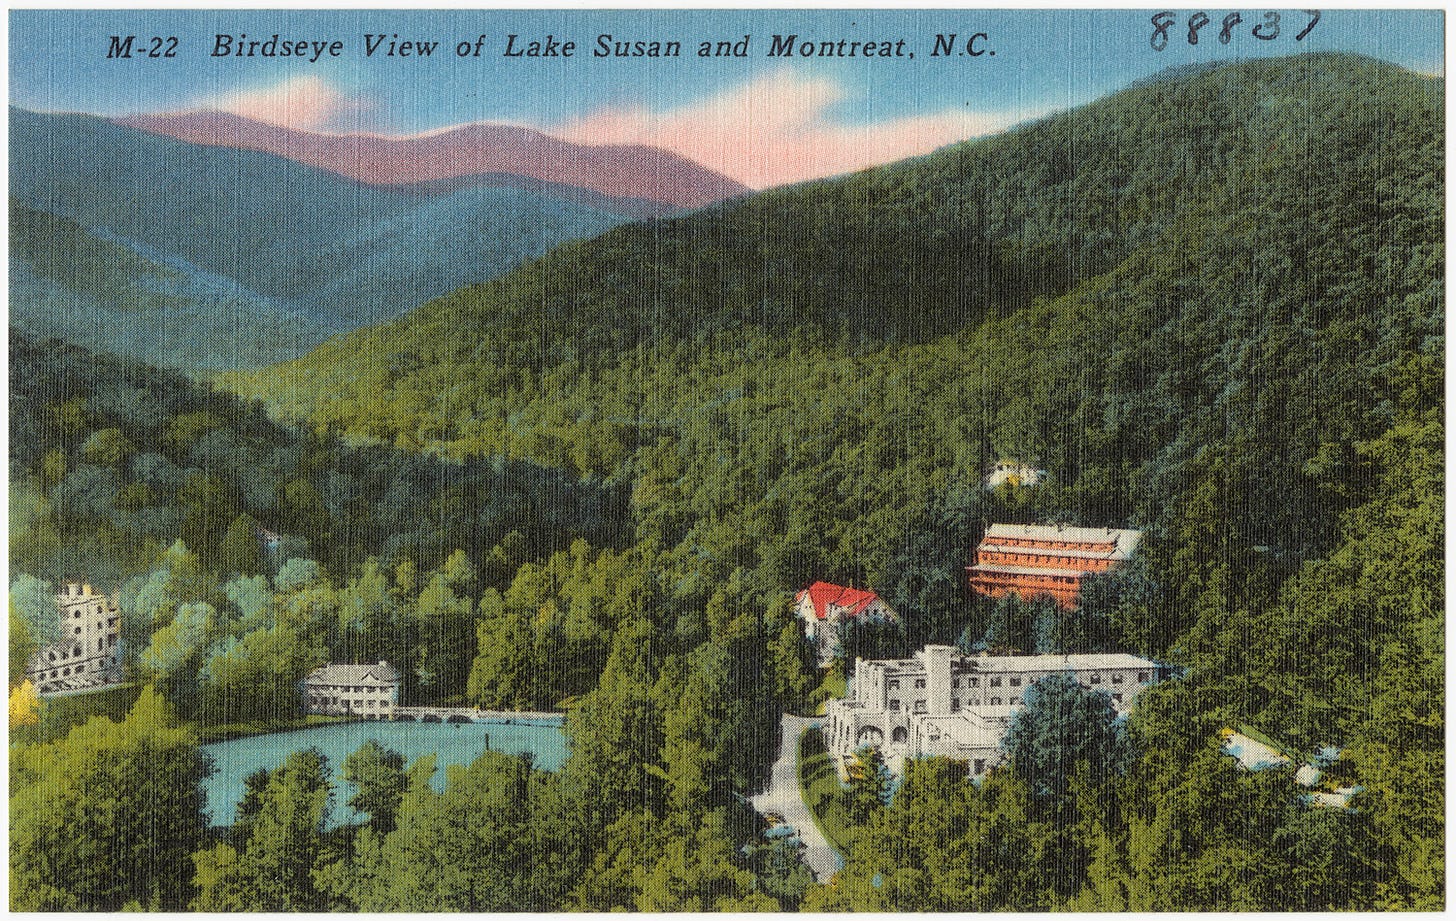 Undated color postcard image of Montreat, North Carolina, including Mountain Retreat Association buildings, Lake Susan, and the surrounding mountain ridges. The image is captioned "M-22 Birdseye View of Lake Susan and Montreat, N.C. with "88837" handwritten in the top right corner in black ink.